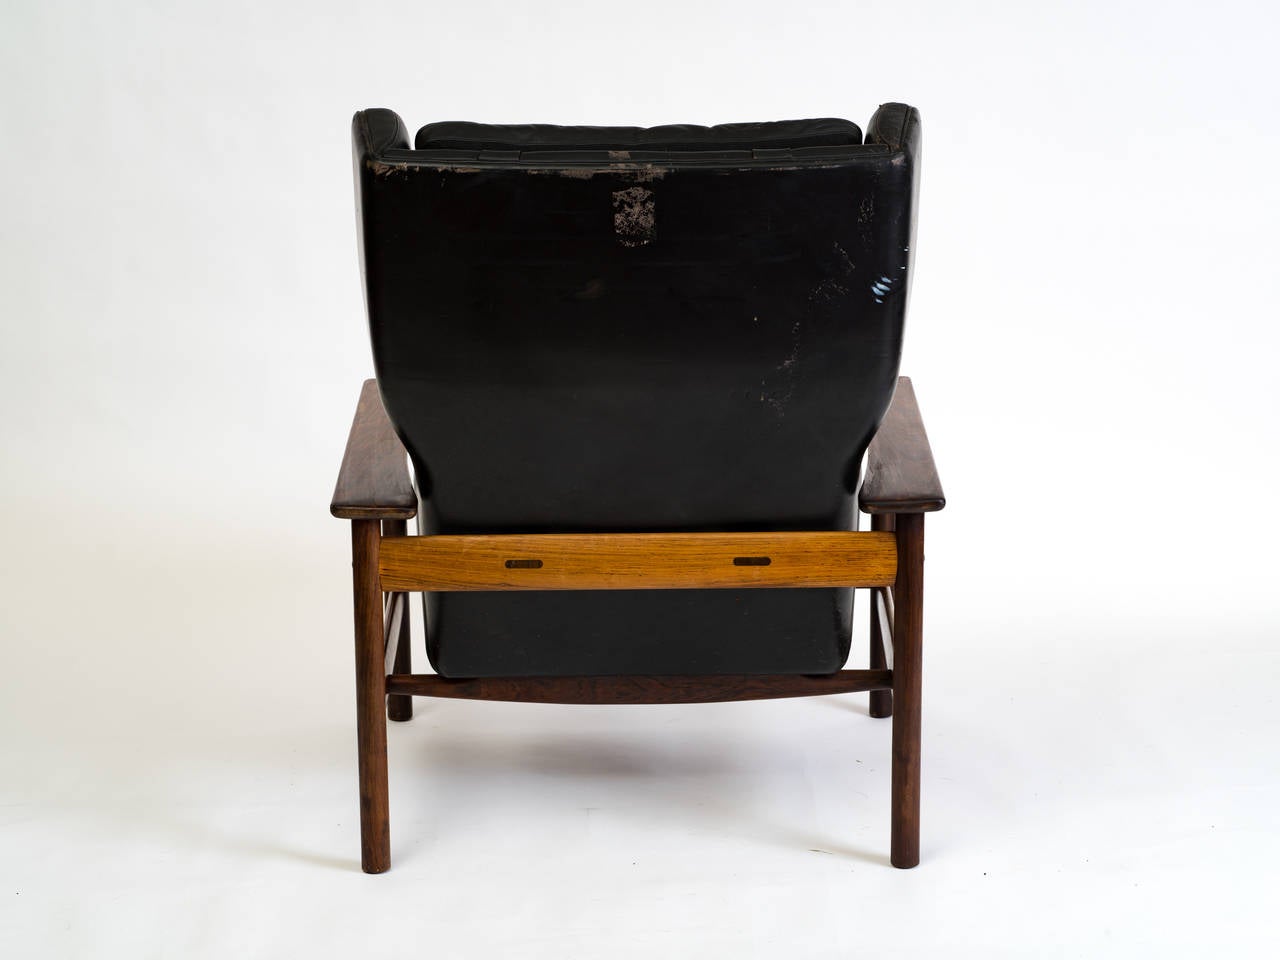 Sven Ivar Dysthe 7001 easy chair by Dokka Mobler. Brazilian rosewood wing back long chair made in 1964.

Needs reupholstering.